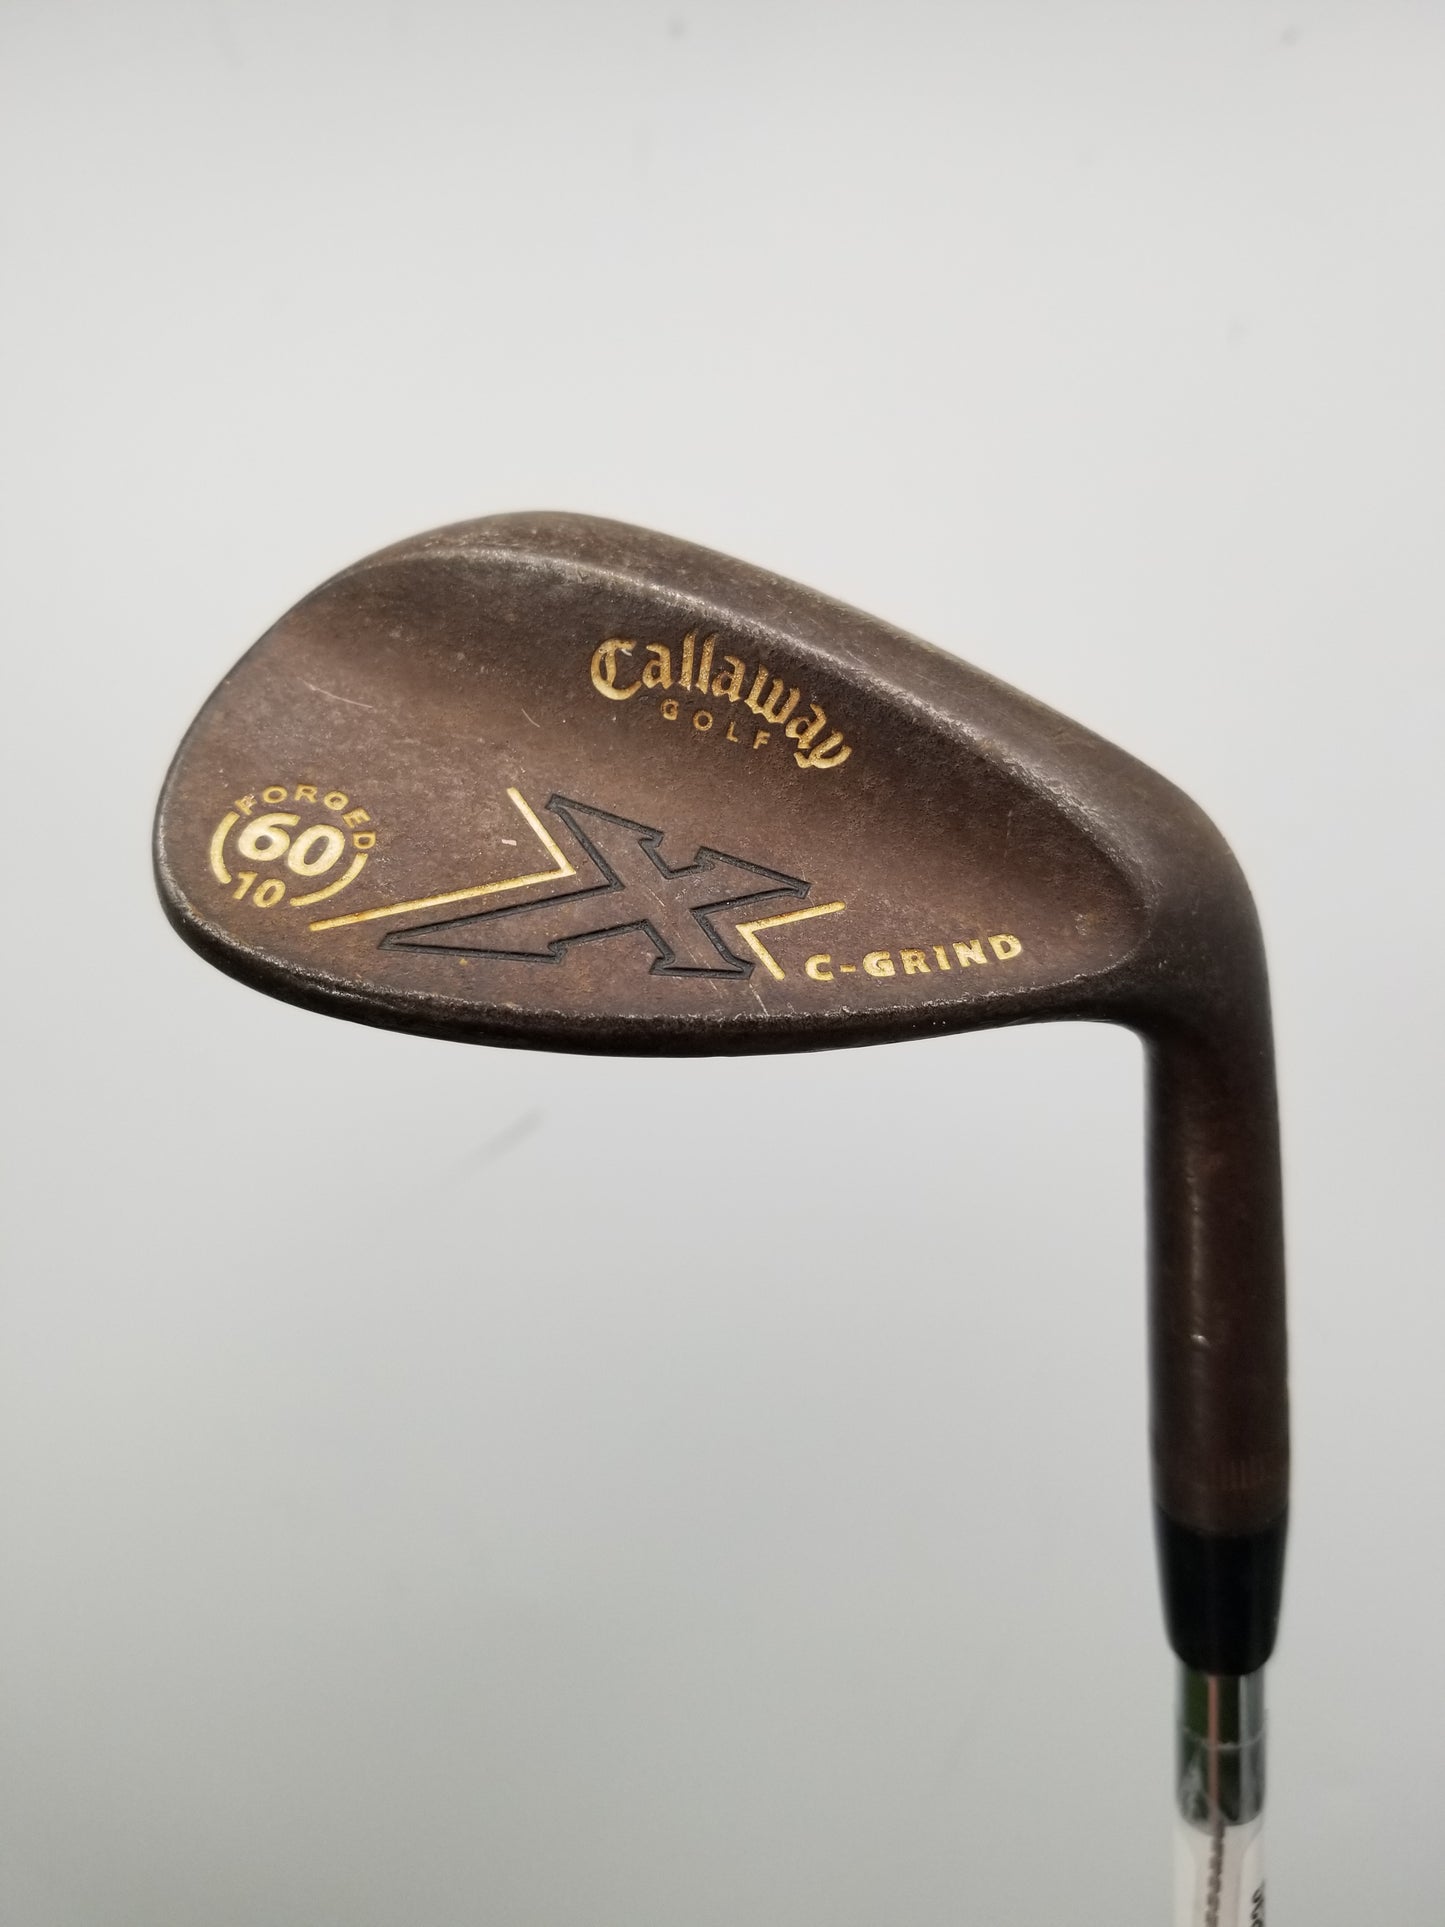 2008 CALLAWAY X FORGED WHITE CHROME WEDGE 60*/10 SENIOR PROJX RIFLE FLIGHTED GOOD